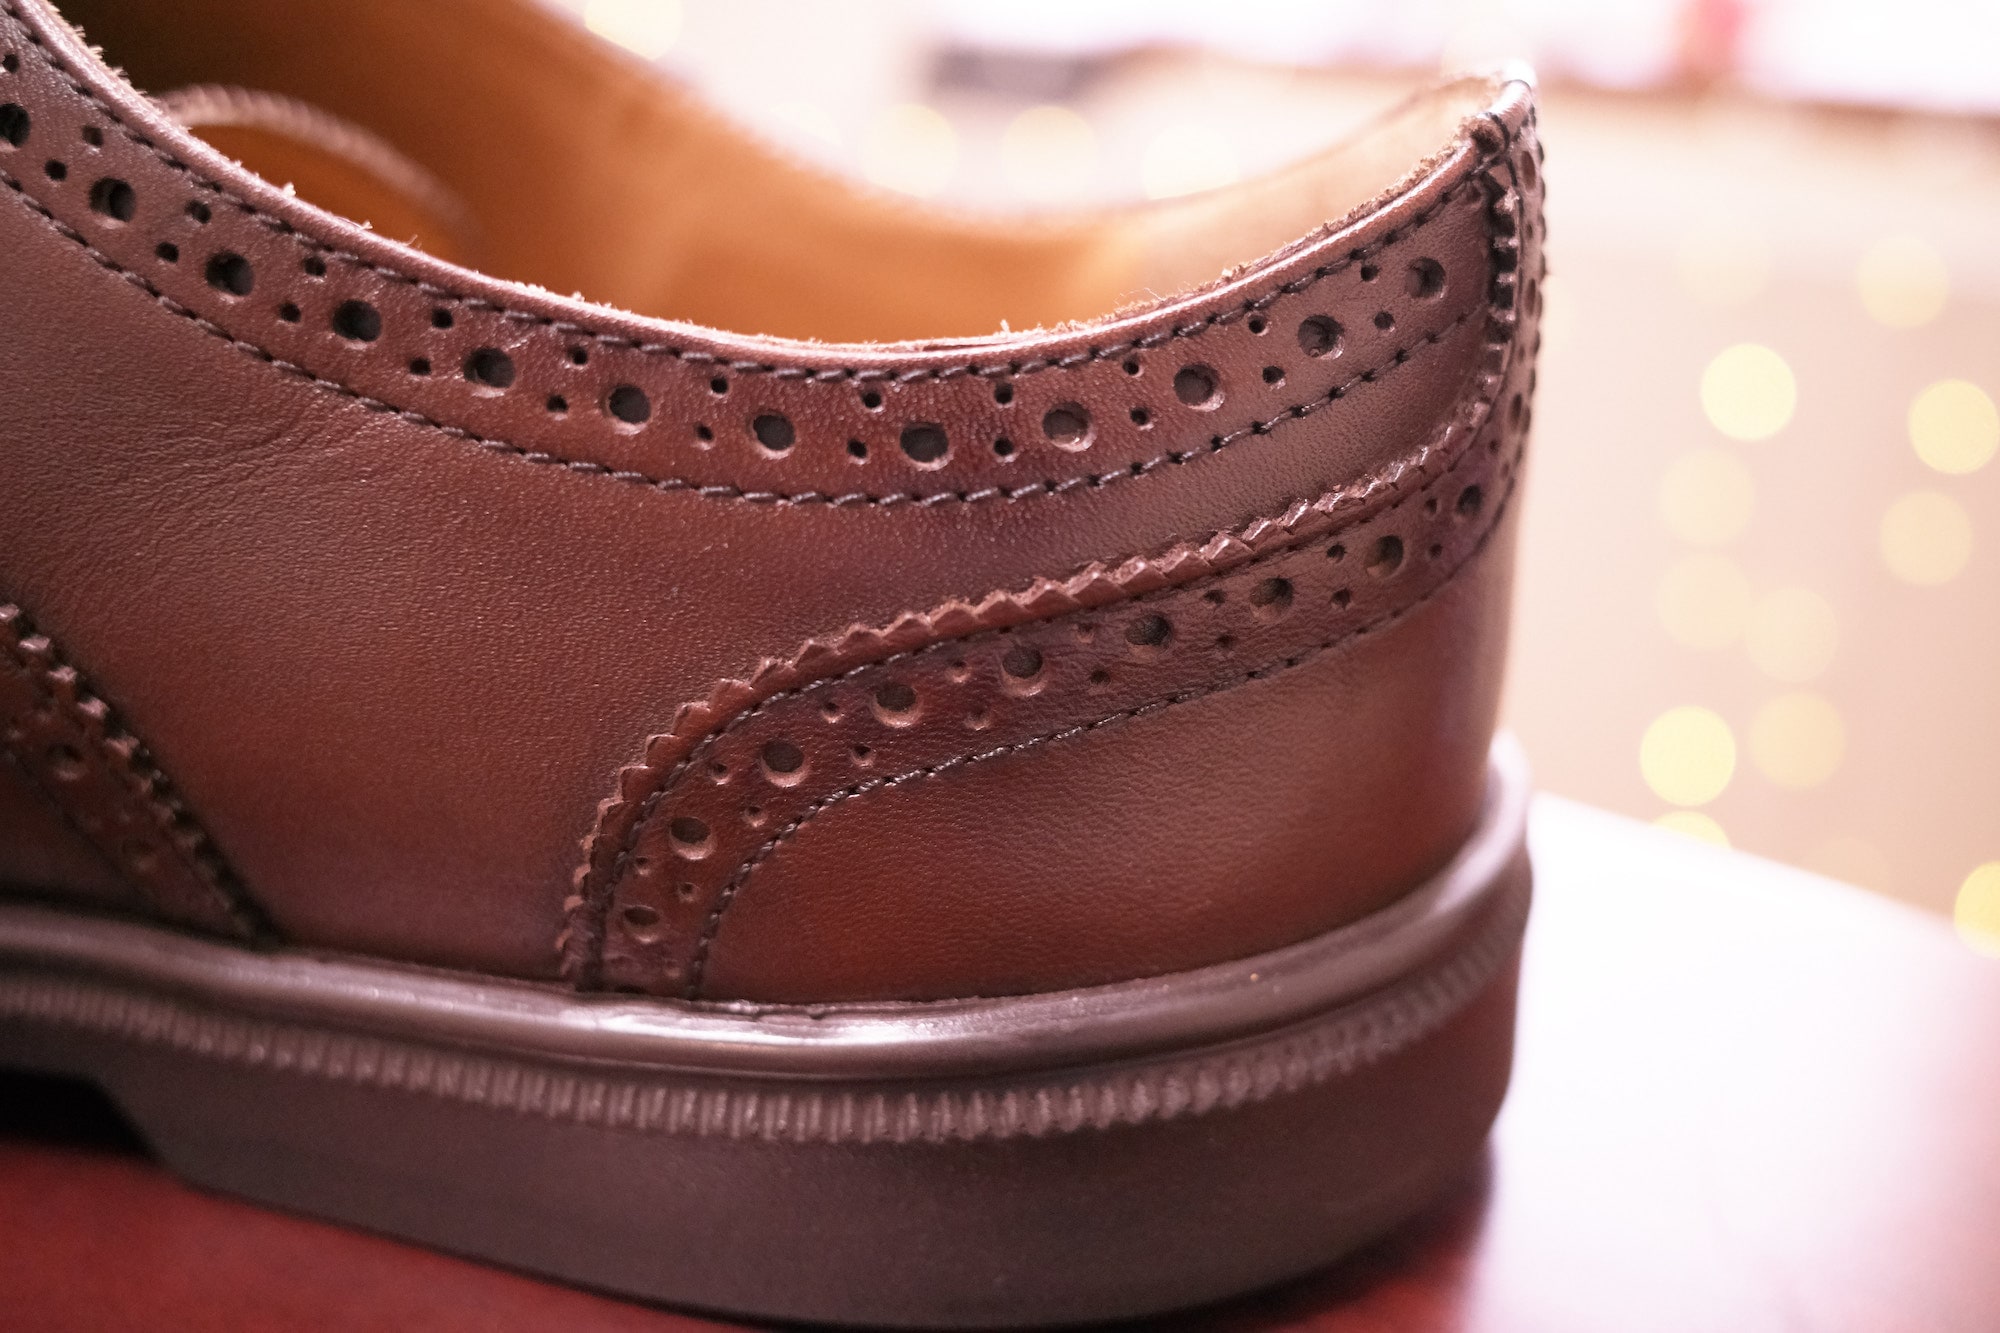 Review Carets Falcon Wingtip Dress Shoes - Birthday Shoes - Toe Shoes ...